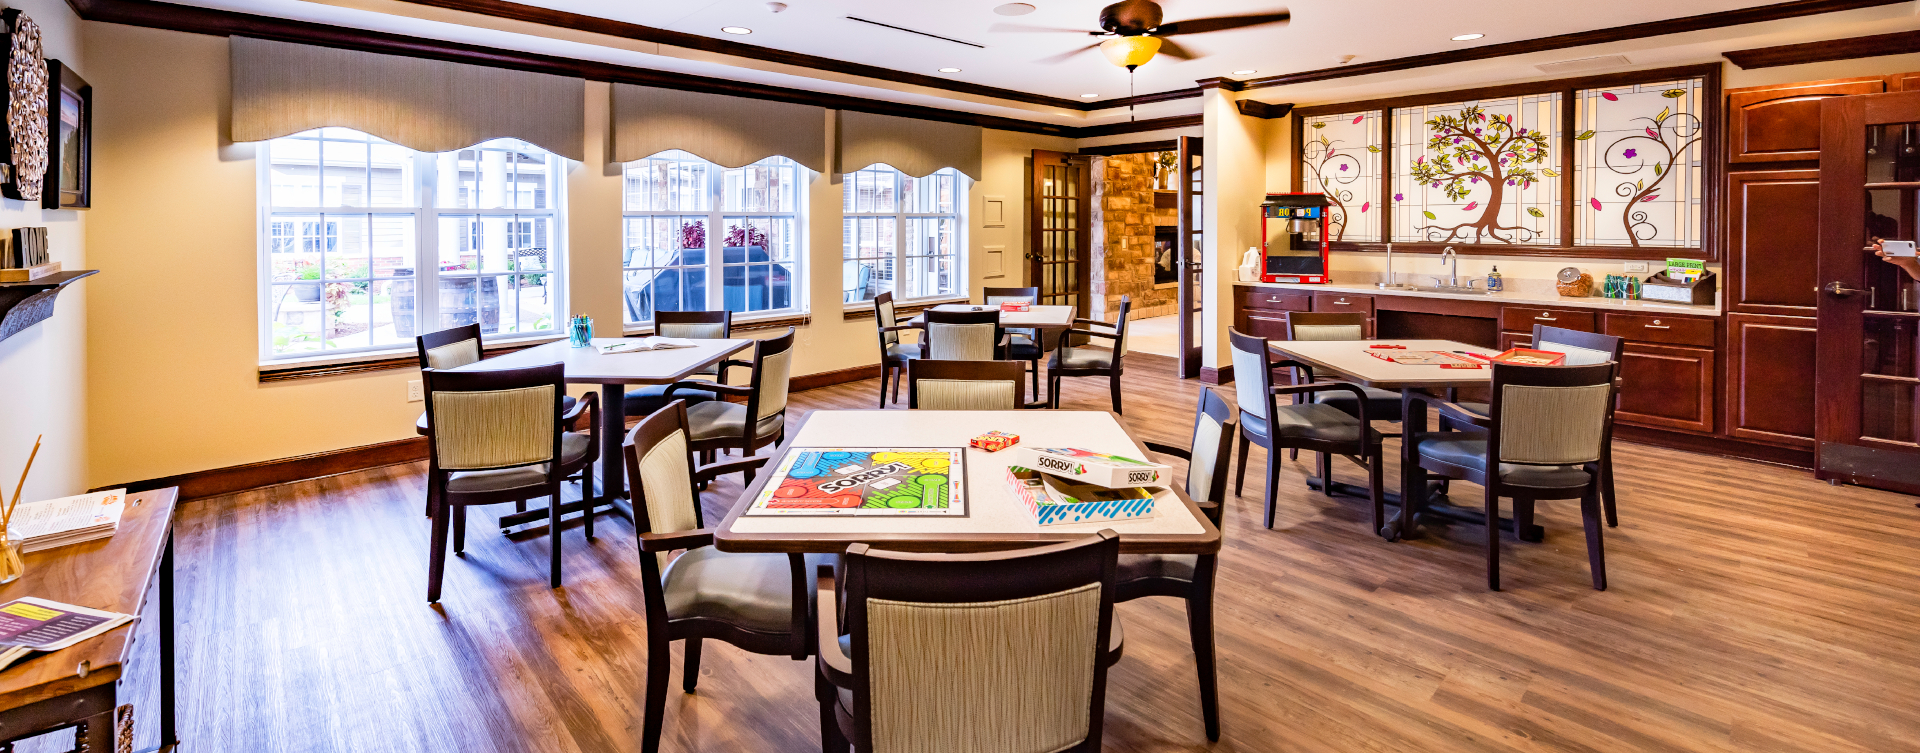 Enjoy a good card game with friends in the activity room at Bickford of Shelby Township